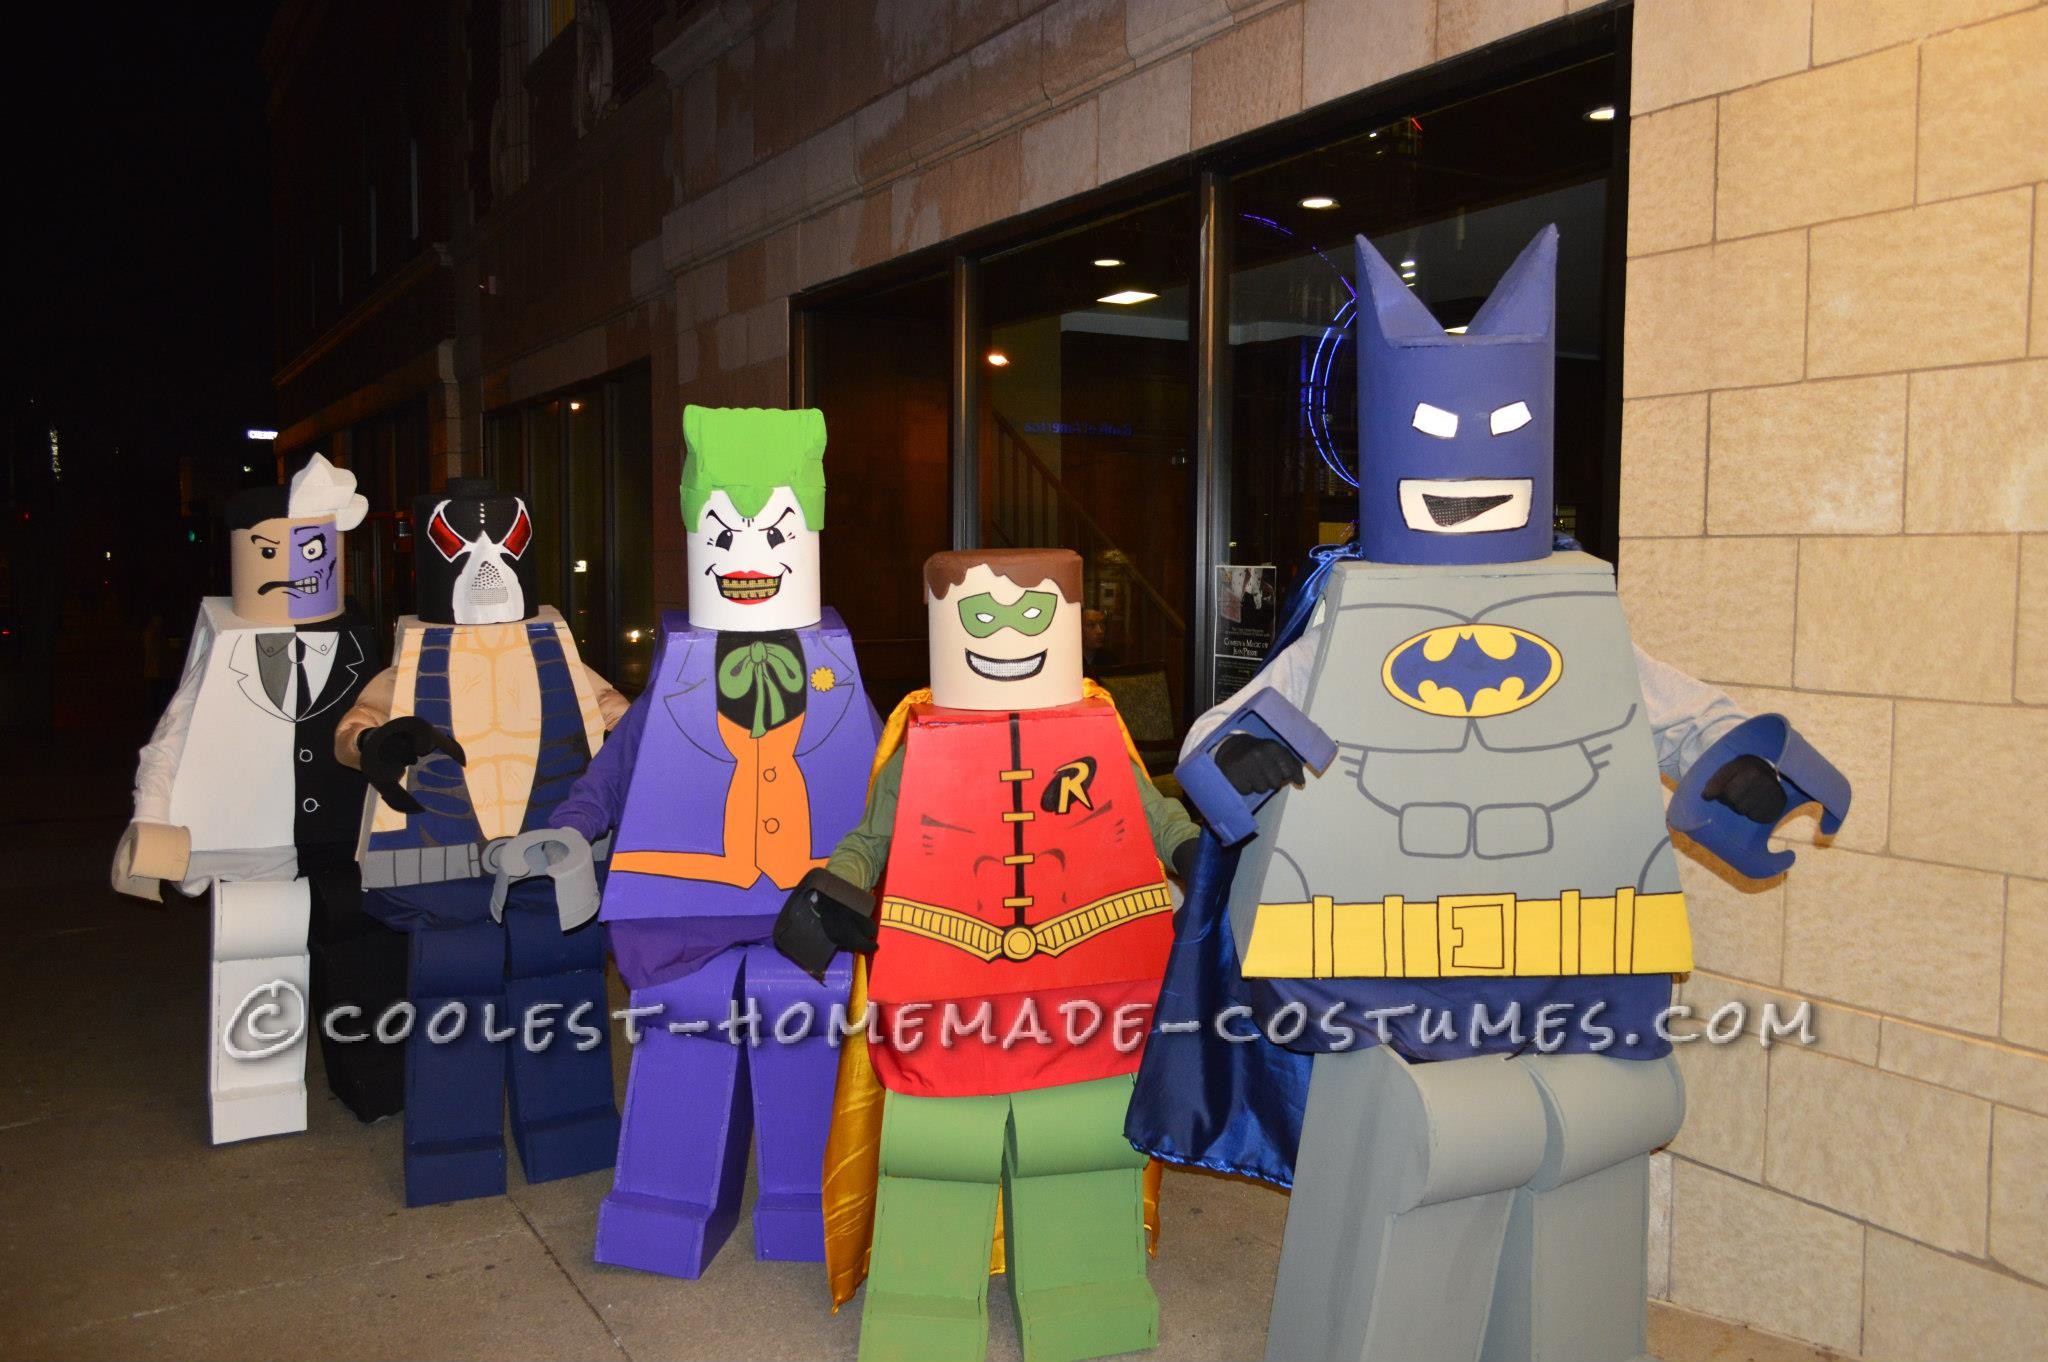 LEGO Minifigure Group Costume: Batman Heroes and Villains: These Batman Heroes and Villains costumes were a ton of work but so much fun to wear.  We strolled down the streets downtown and people were shriekin